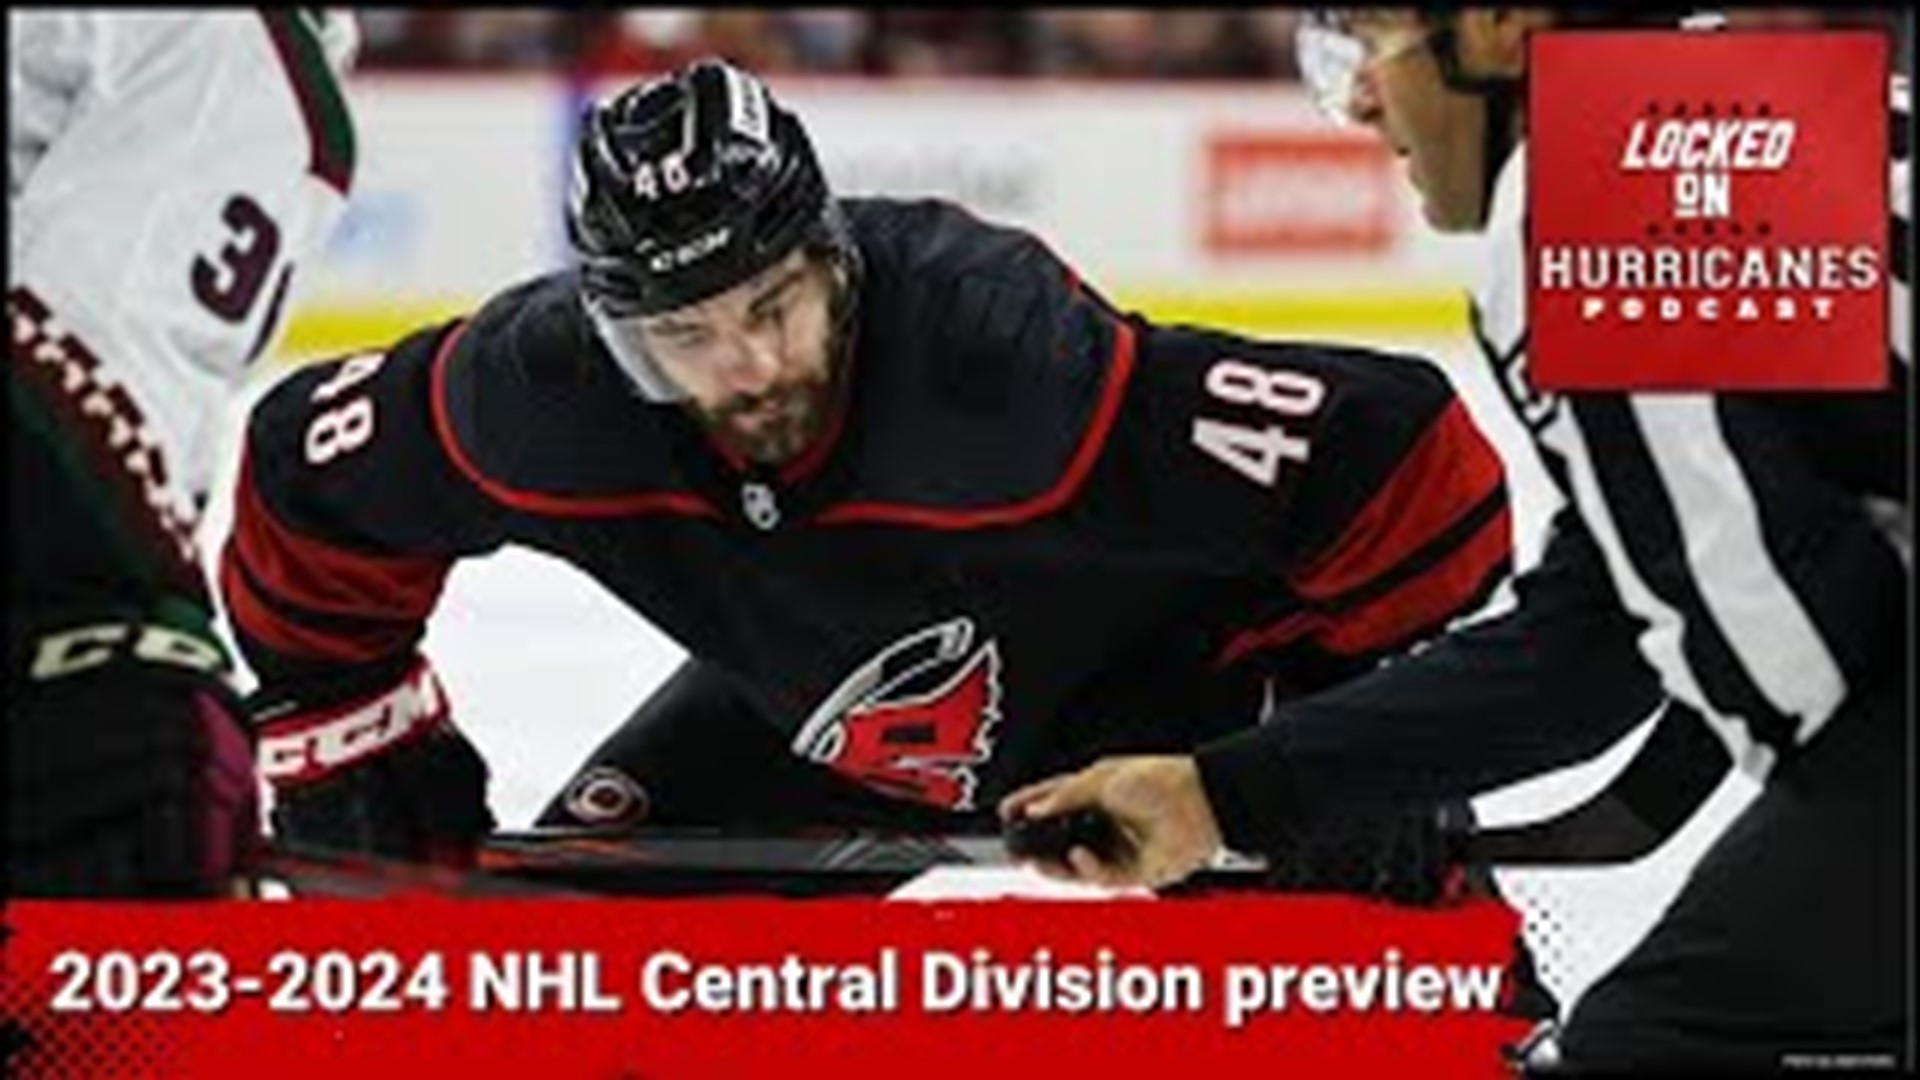 Our season preview is heading out West, starting with the Central Division. That and more on Locked On Hurricanes